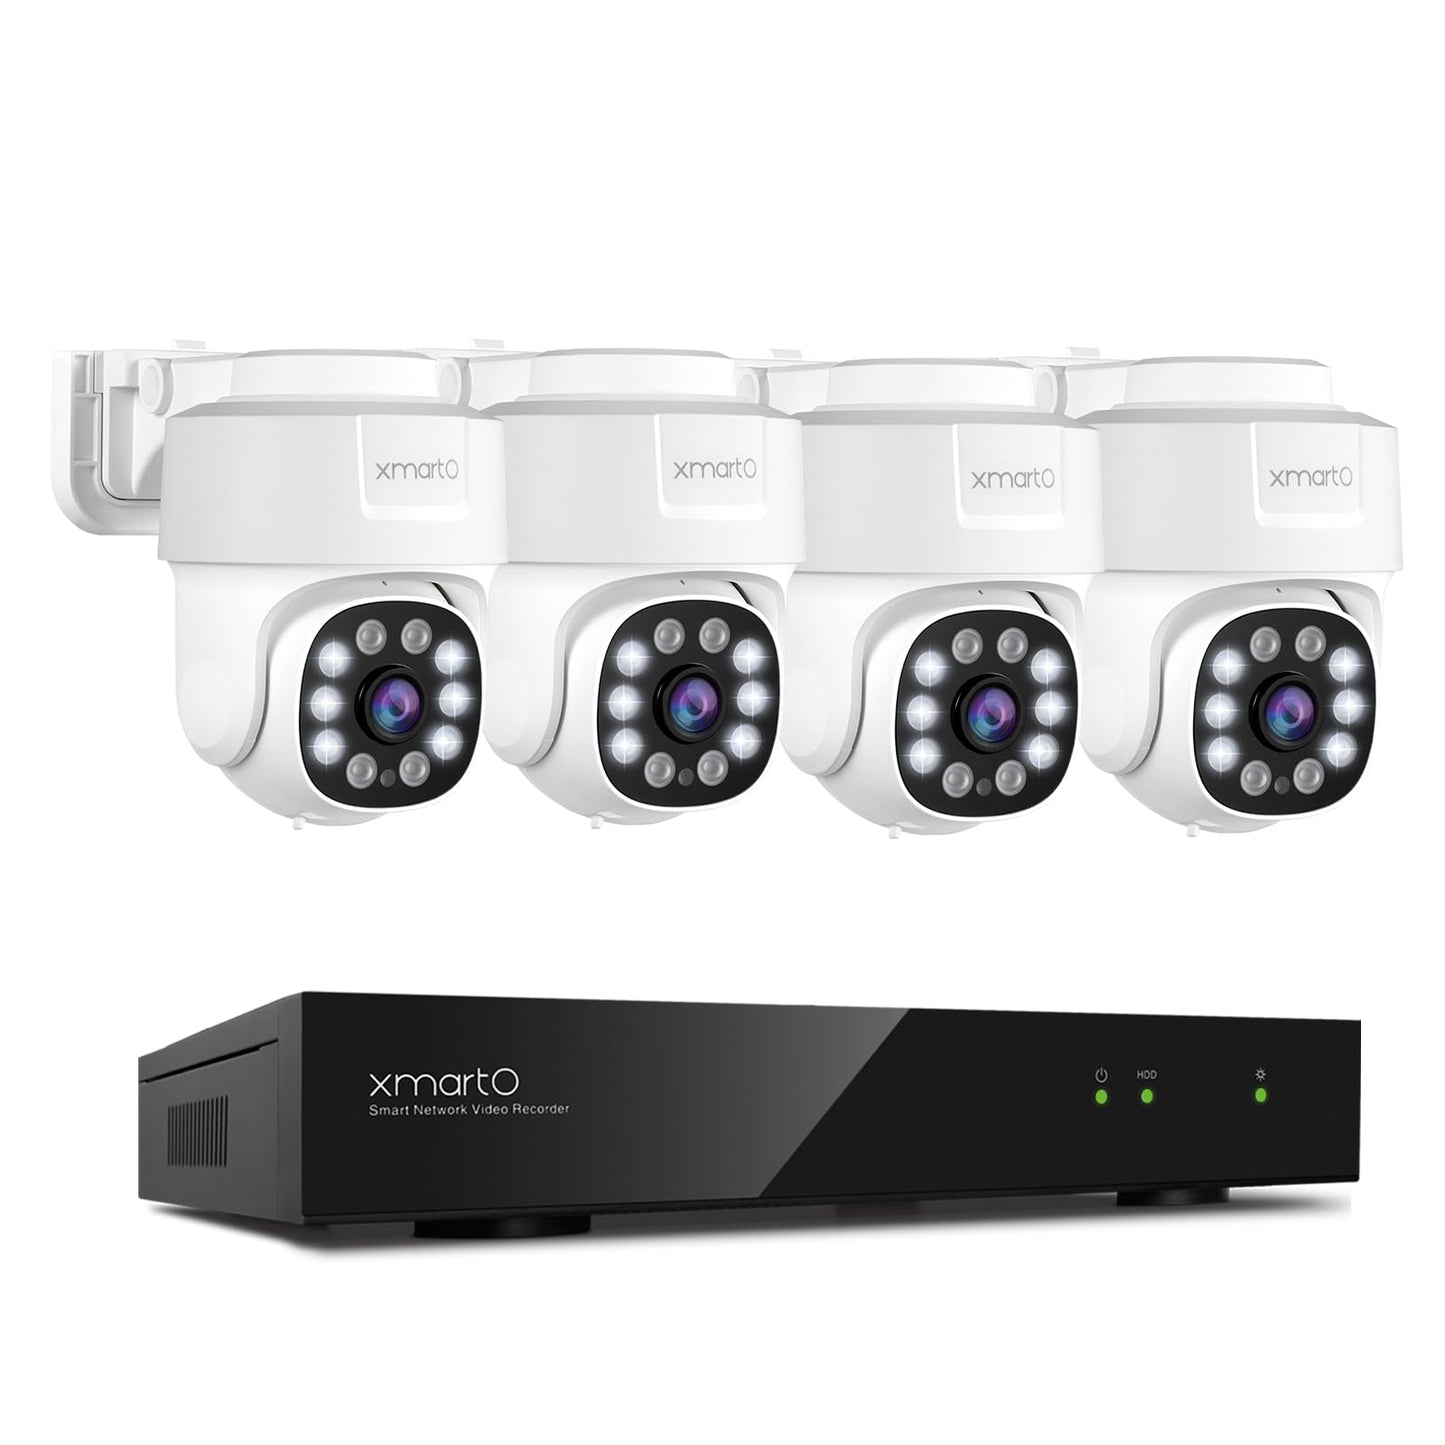 XMARTO 8CH 4K H.265 Auto-Tracking PoE Security Camera System, Pan Tilt Zoom, 4pcs Surveillance Cameras Set Wired with Humanoid Detection, 24/7 Recording, EPS8084 (w/o HDD Version)